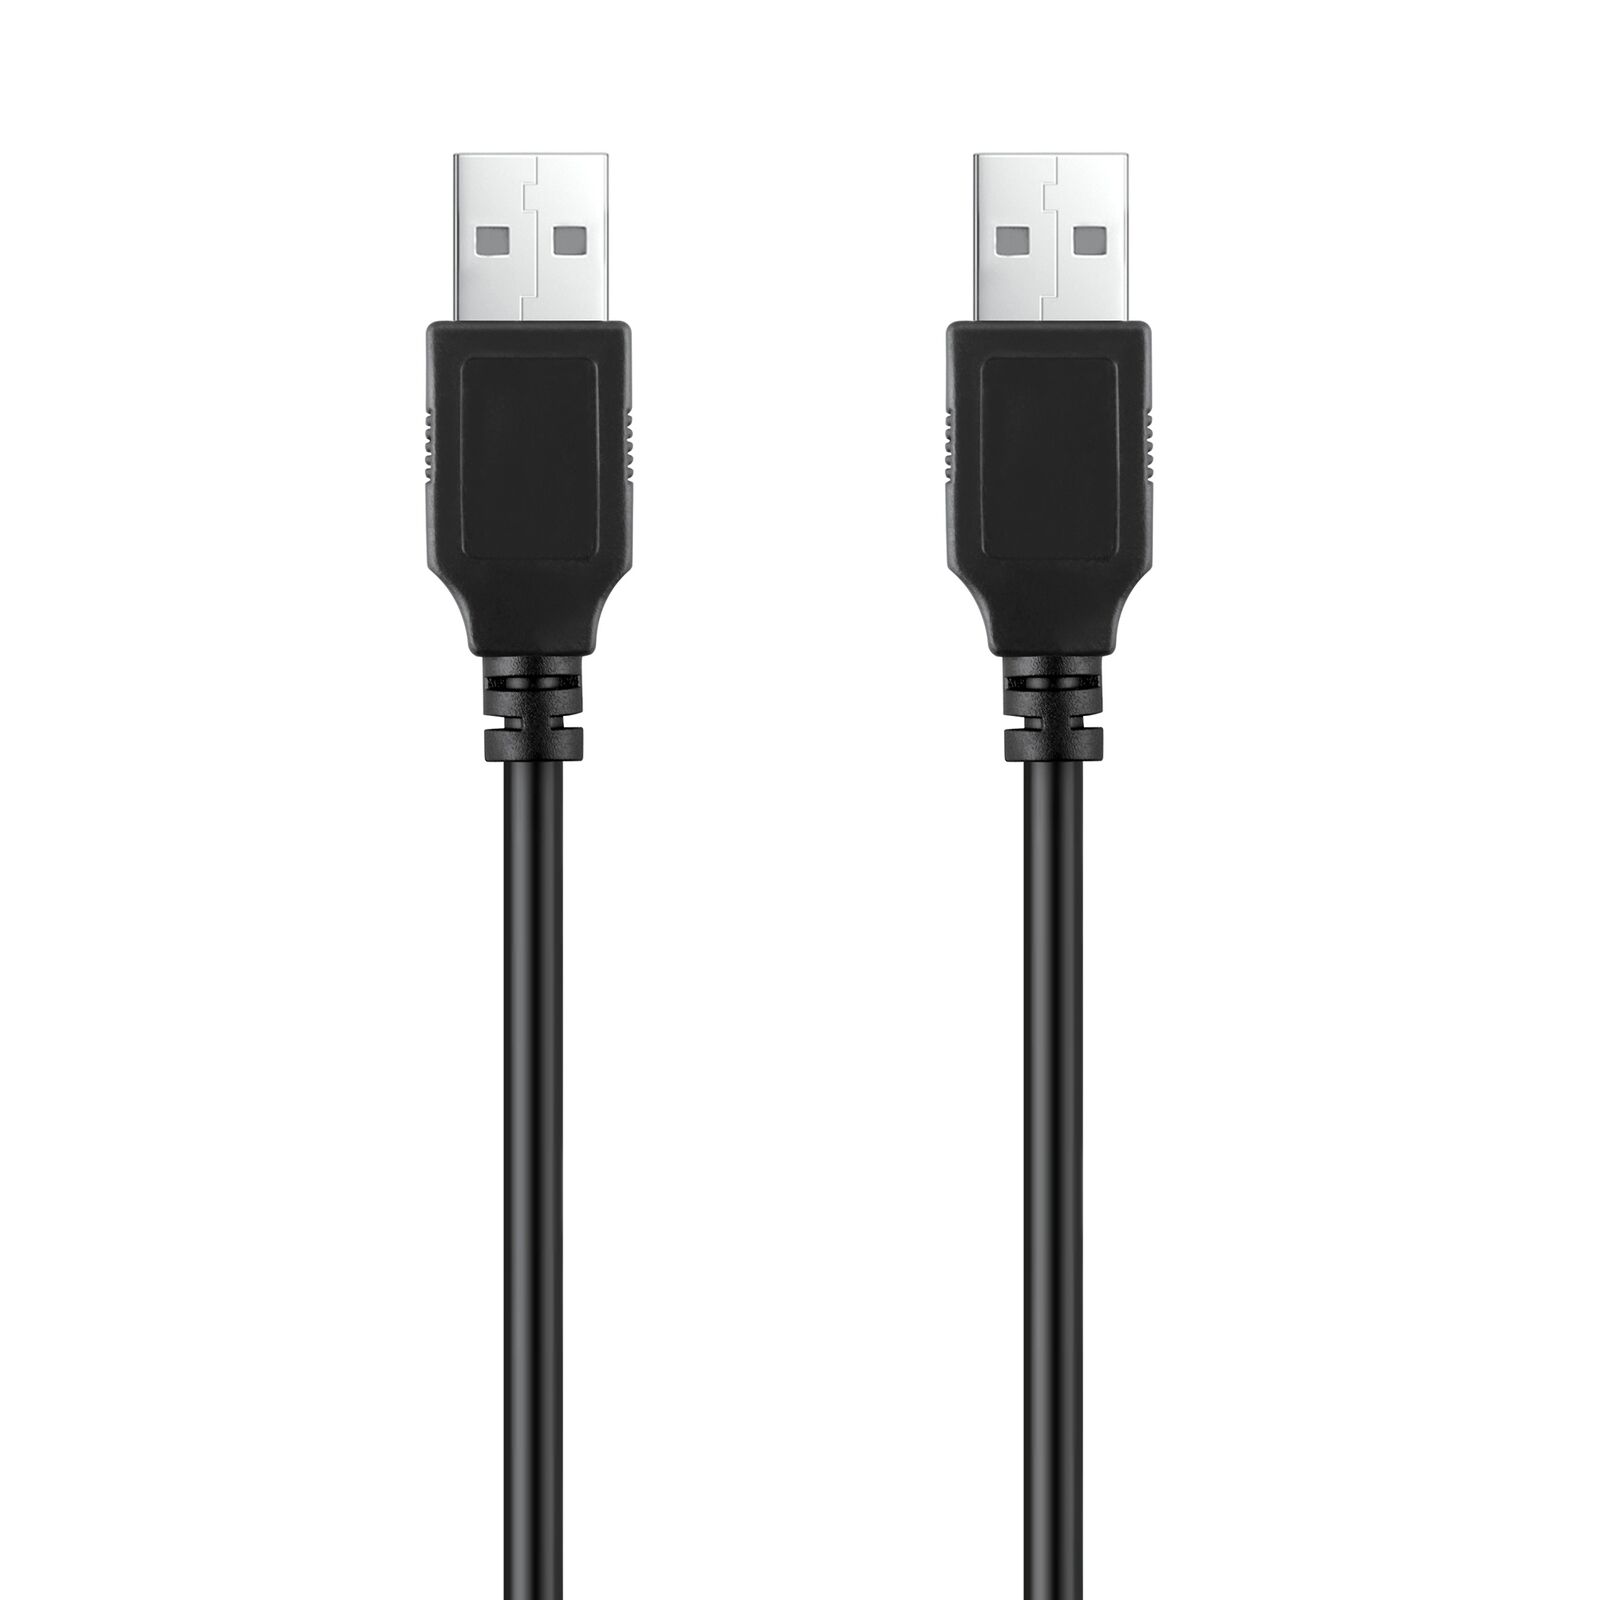 USB 2.0 A to A Cable Type A Male to Male Cable Cord for Data Transfer Hard Drive